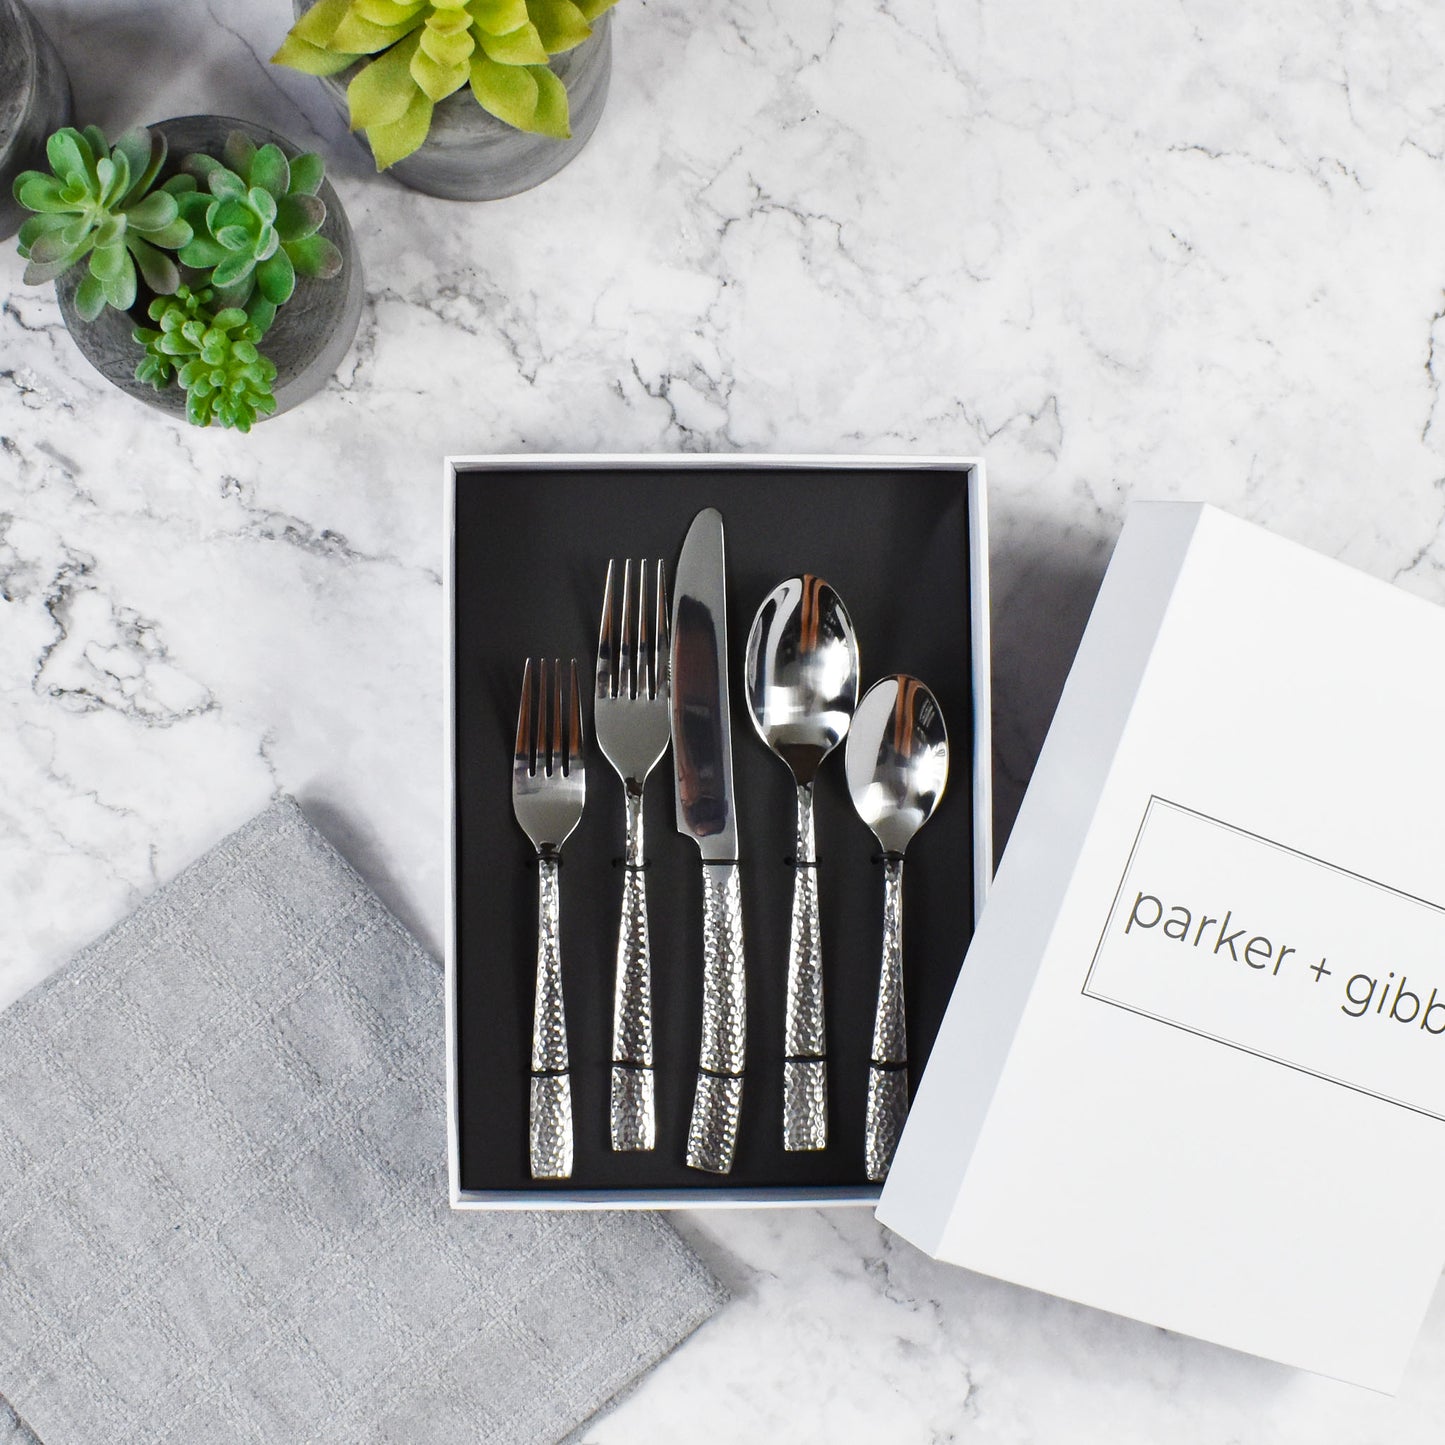 Polished silver hammered flatware  in custom box on marble countertop with succulents in concrete planters.